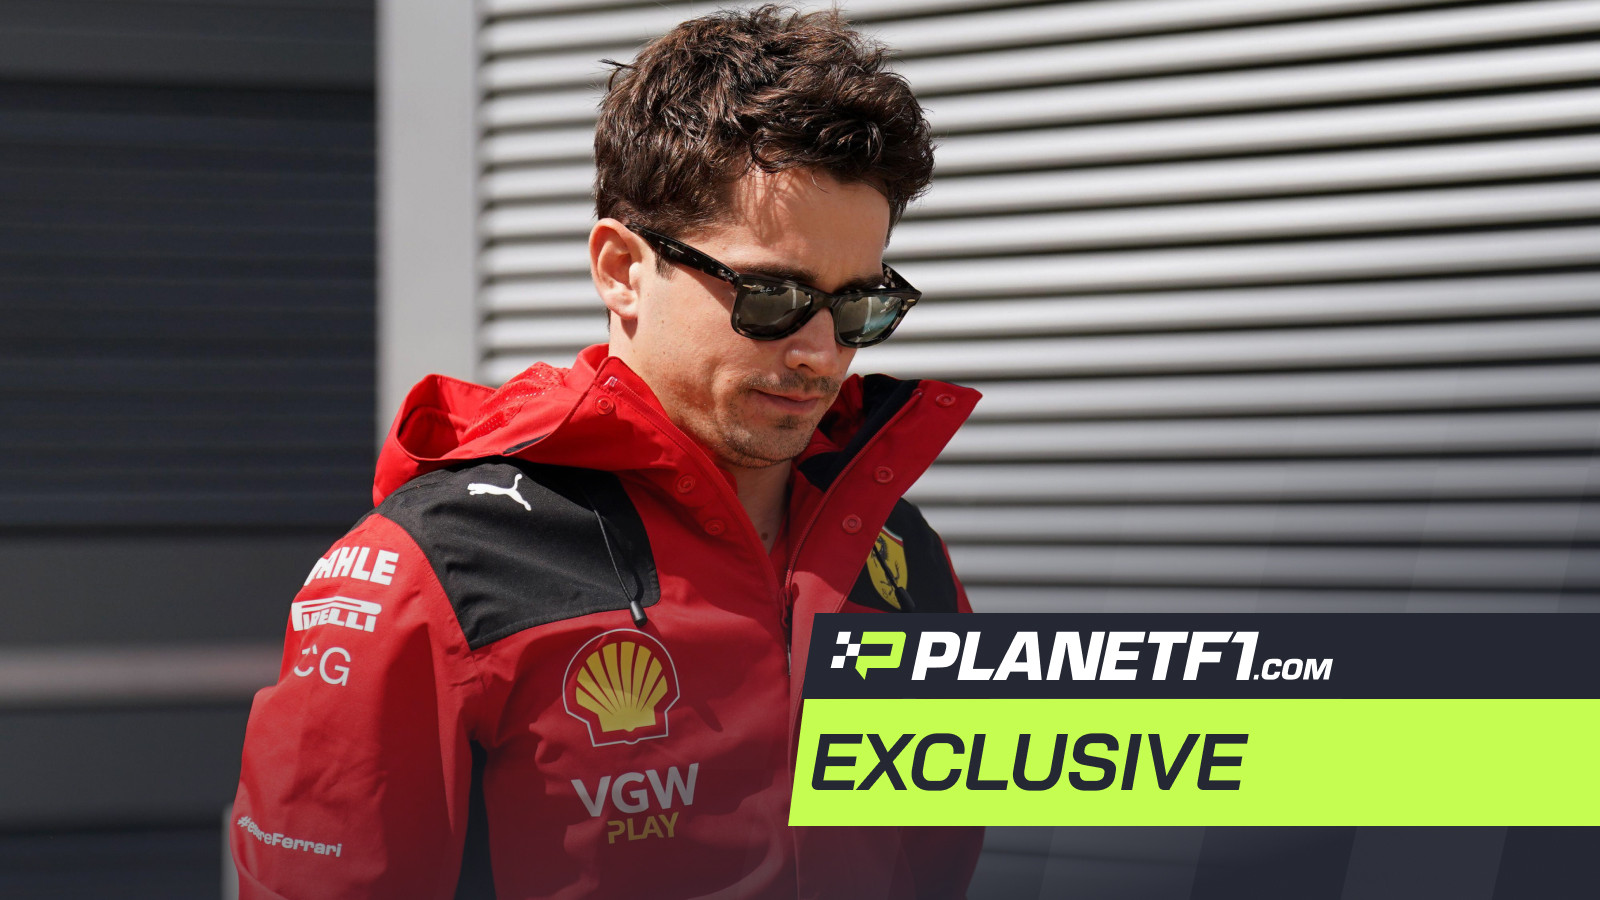 Ferrari F1 Driver Charles Leclerc Released a Single on Spotify. Naturally,  Here's My Review